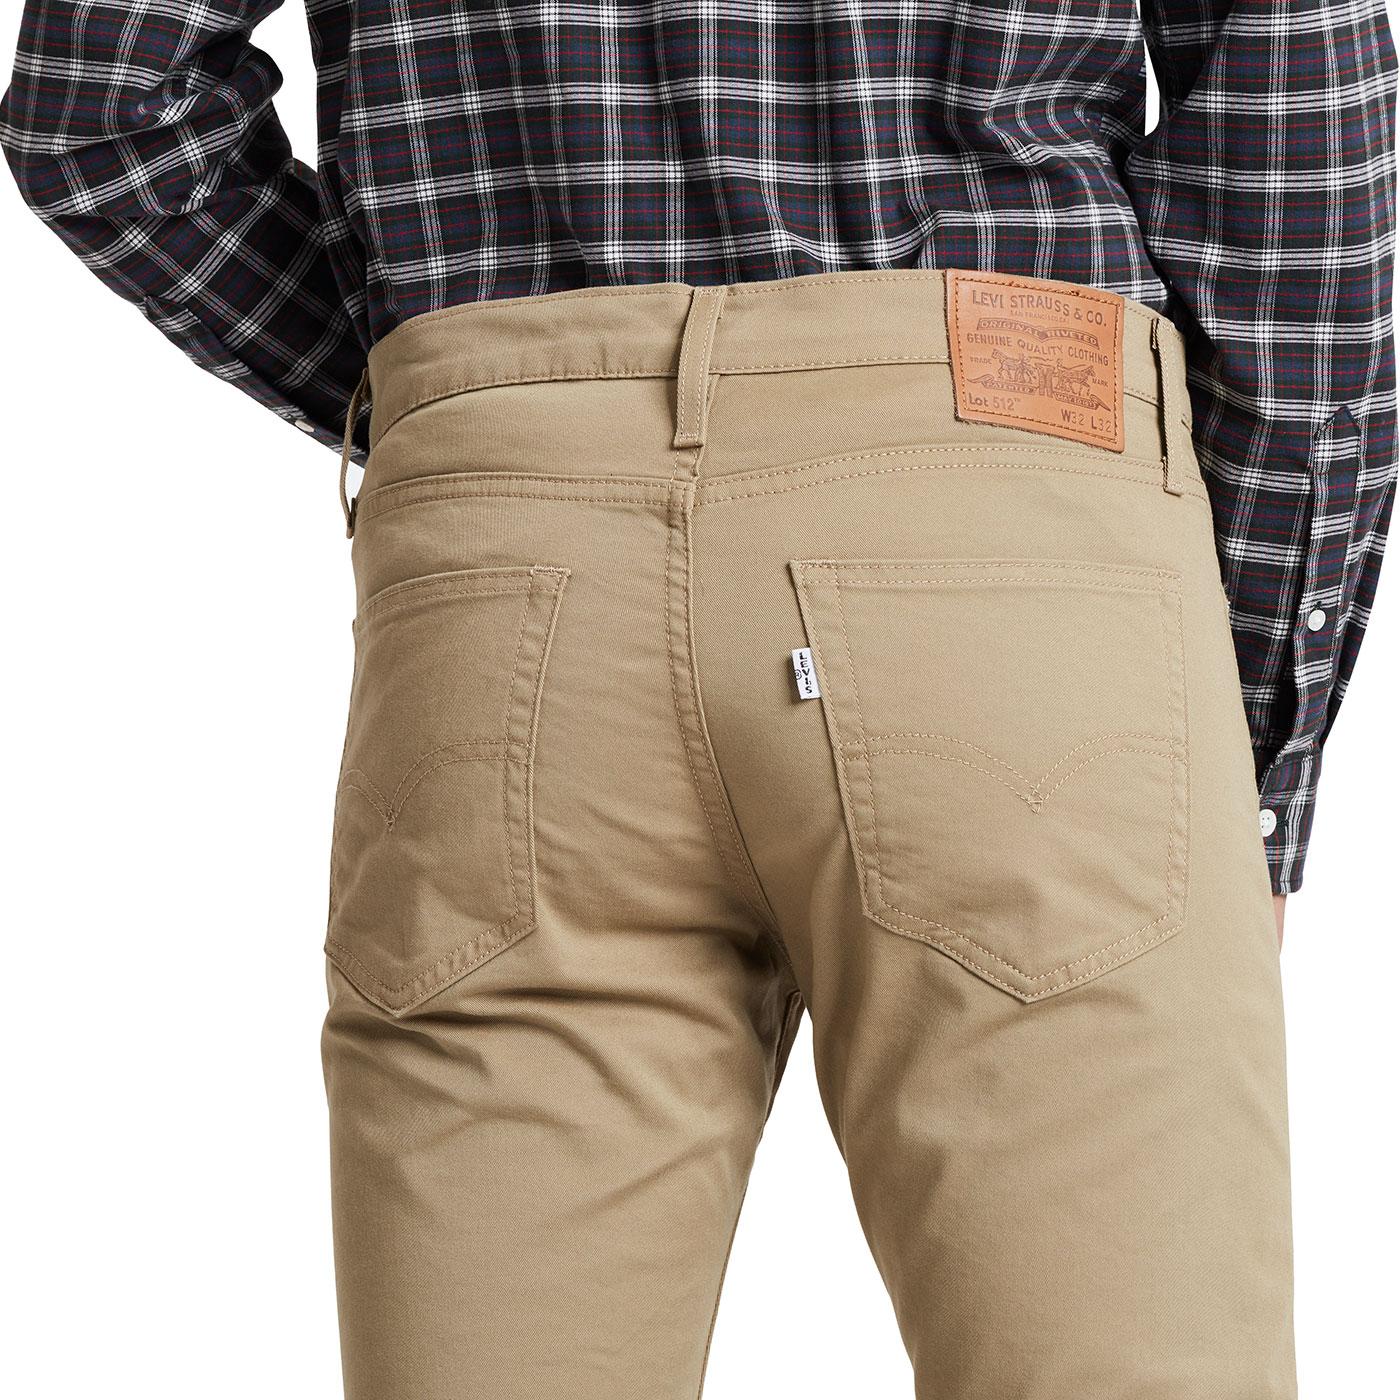 Slim Taper Fit Chinos in Harvest Gold